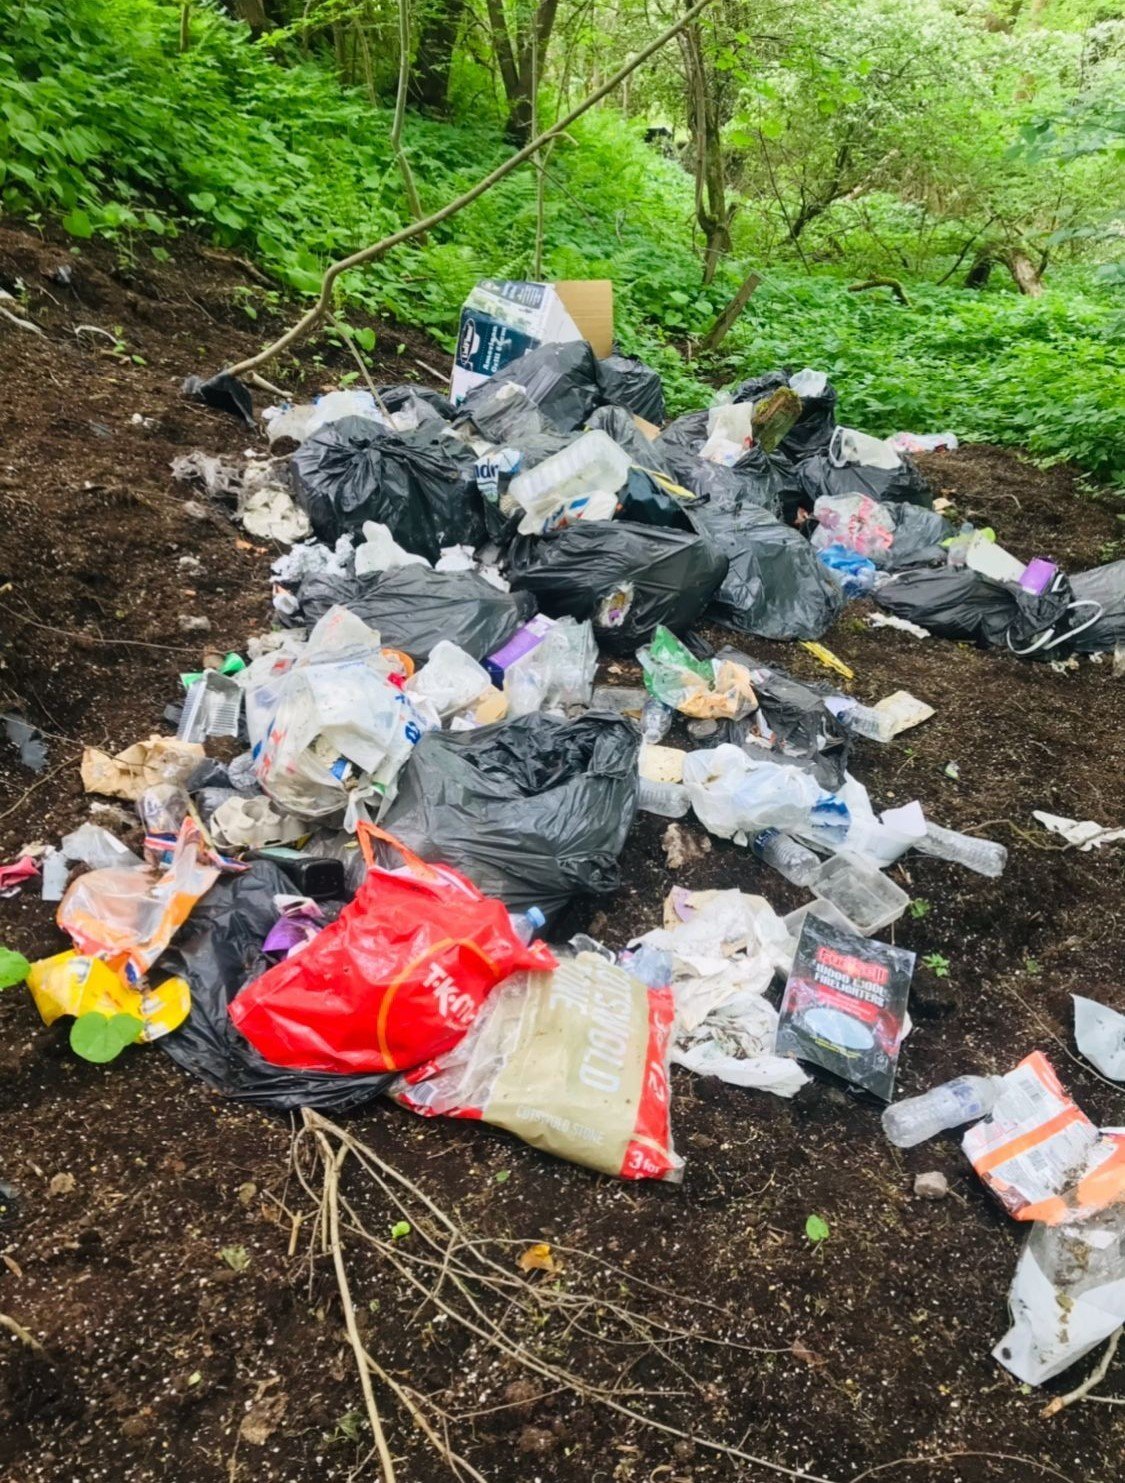 Fly-tipping in a rural location near the River Avon, Falkirk.